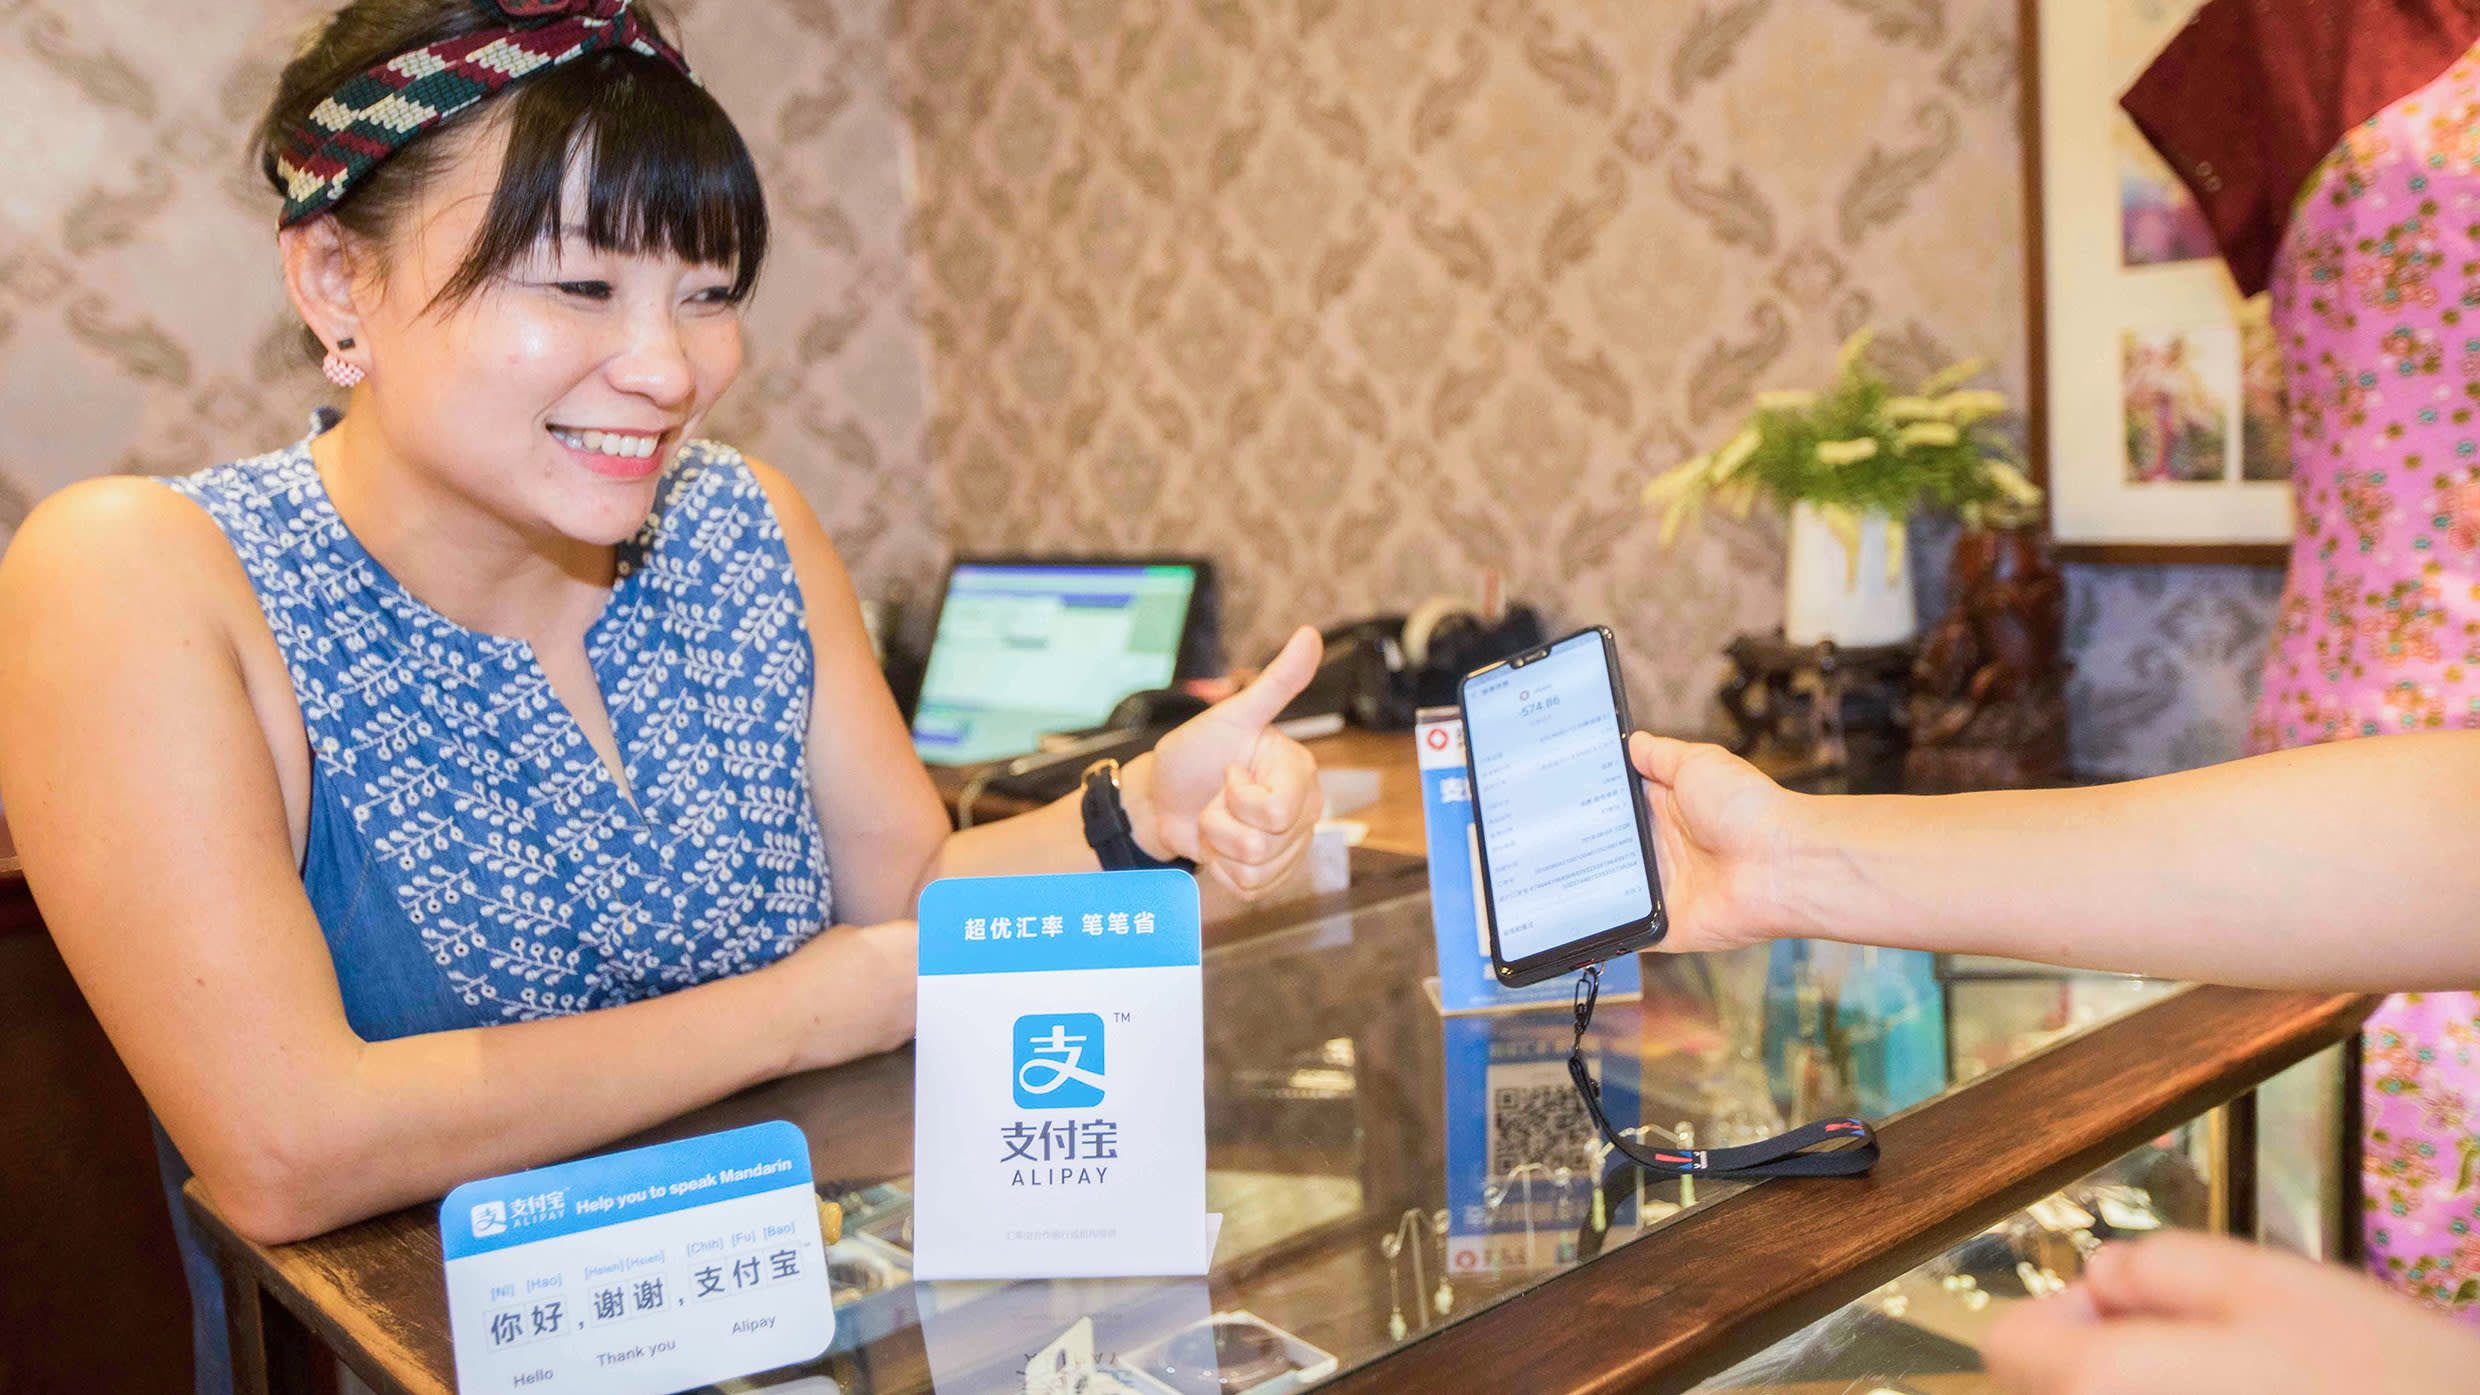 Alibaba’s Ant Group seeks to dominate SE Asia e-payment with IPO